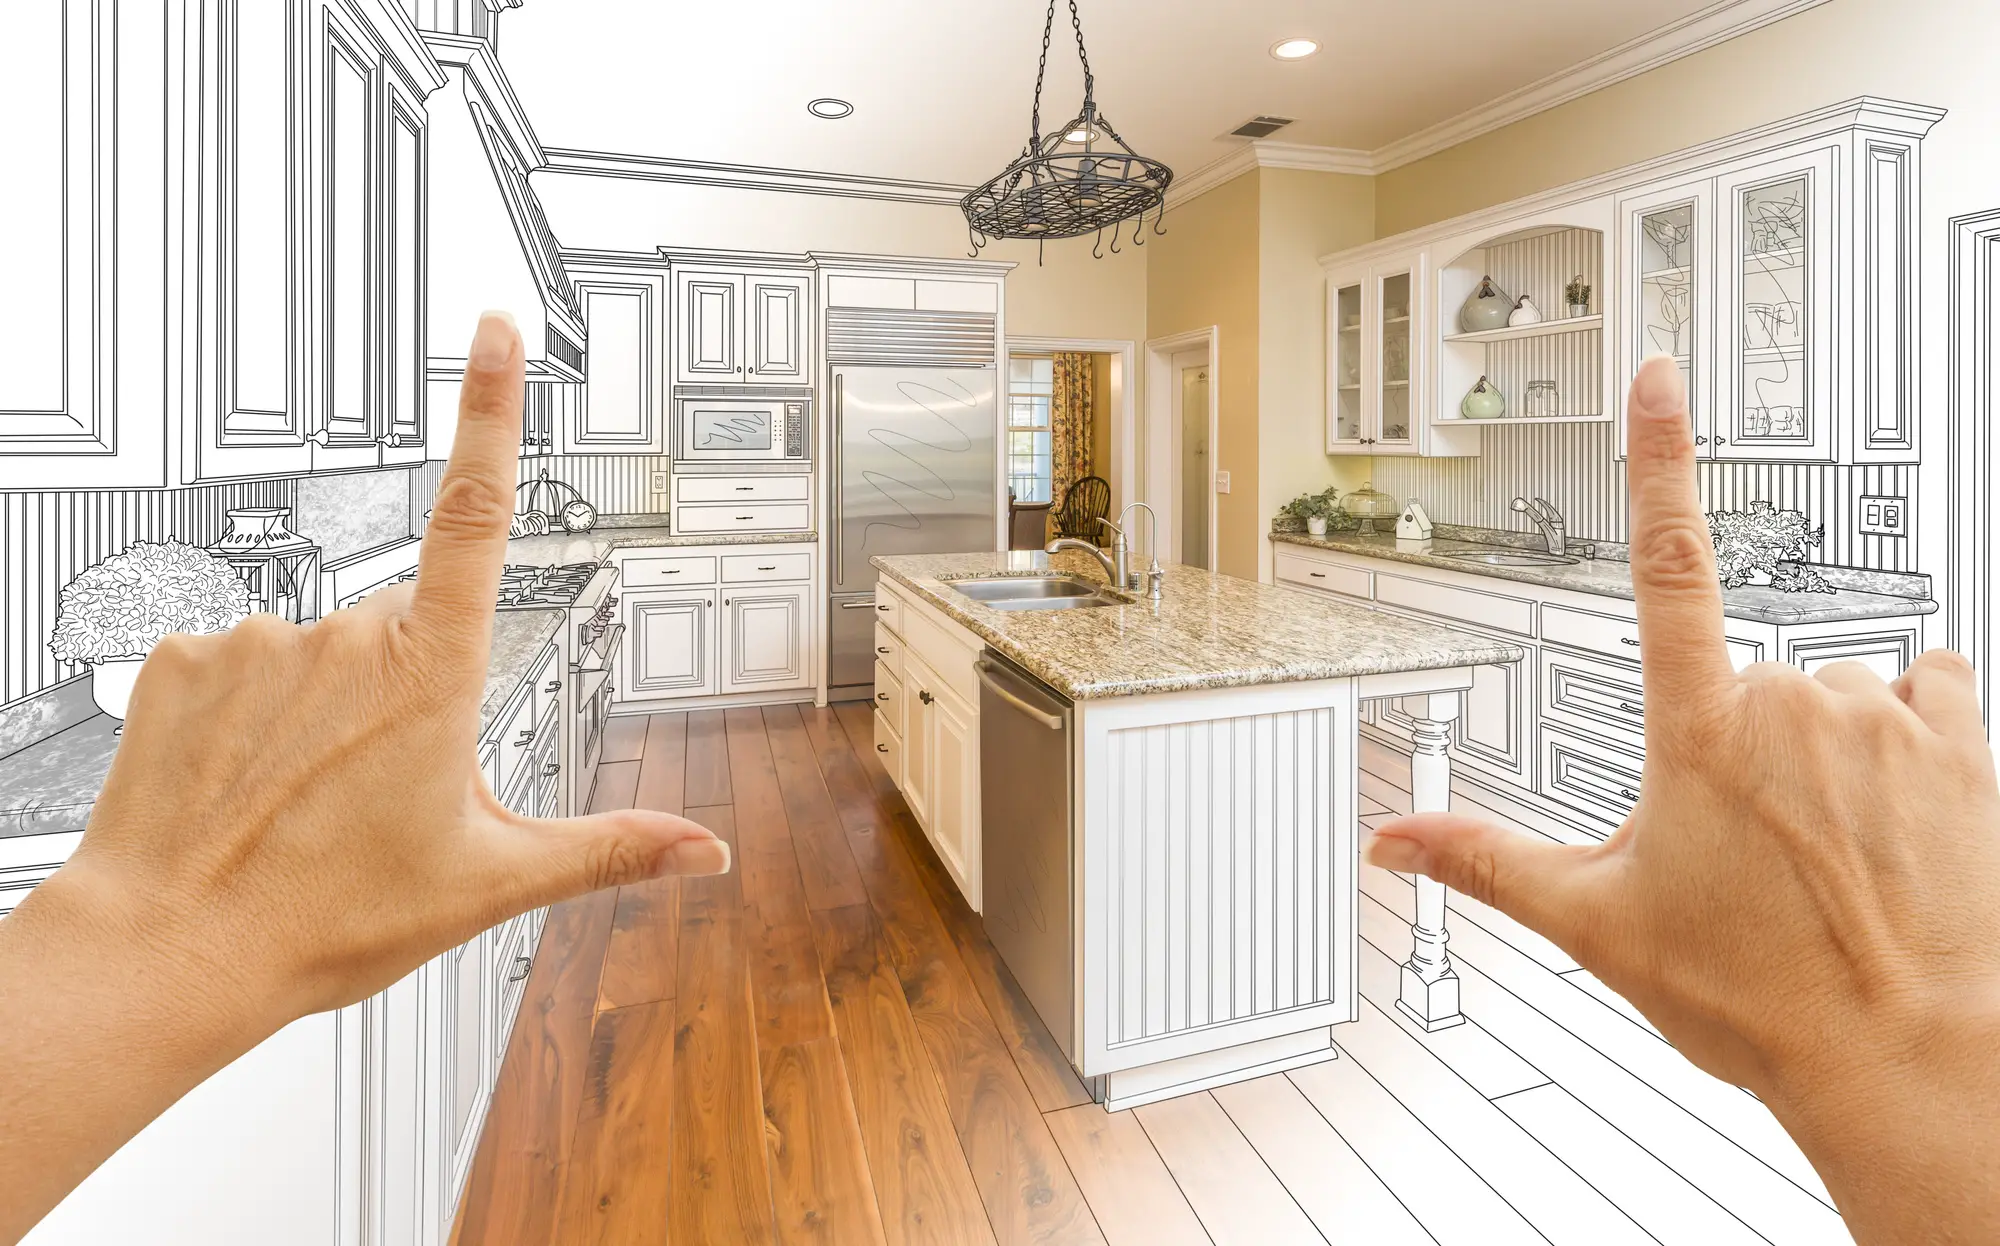 Bathroom Next to Kitchen Regulations: Planning a Home the Right Way